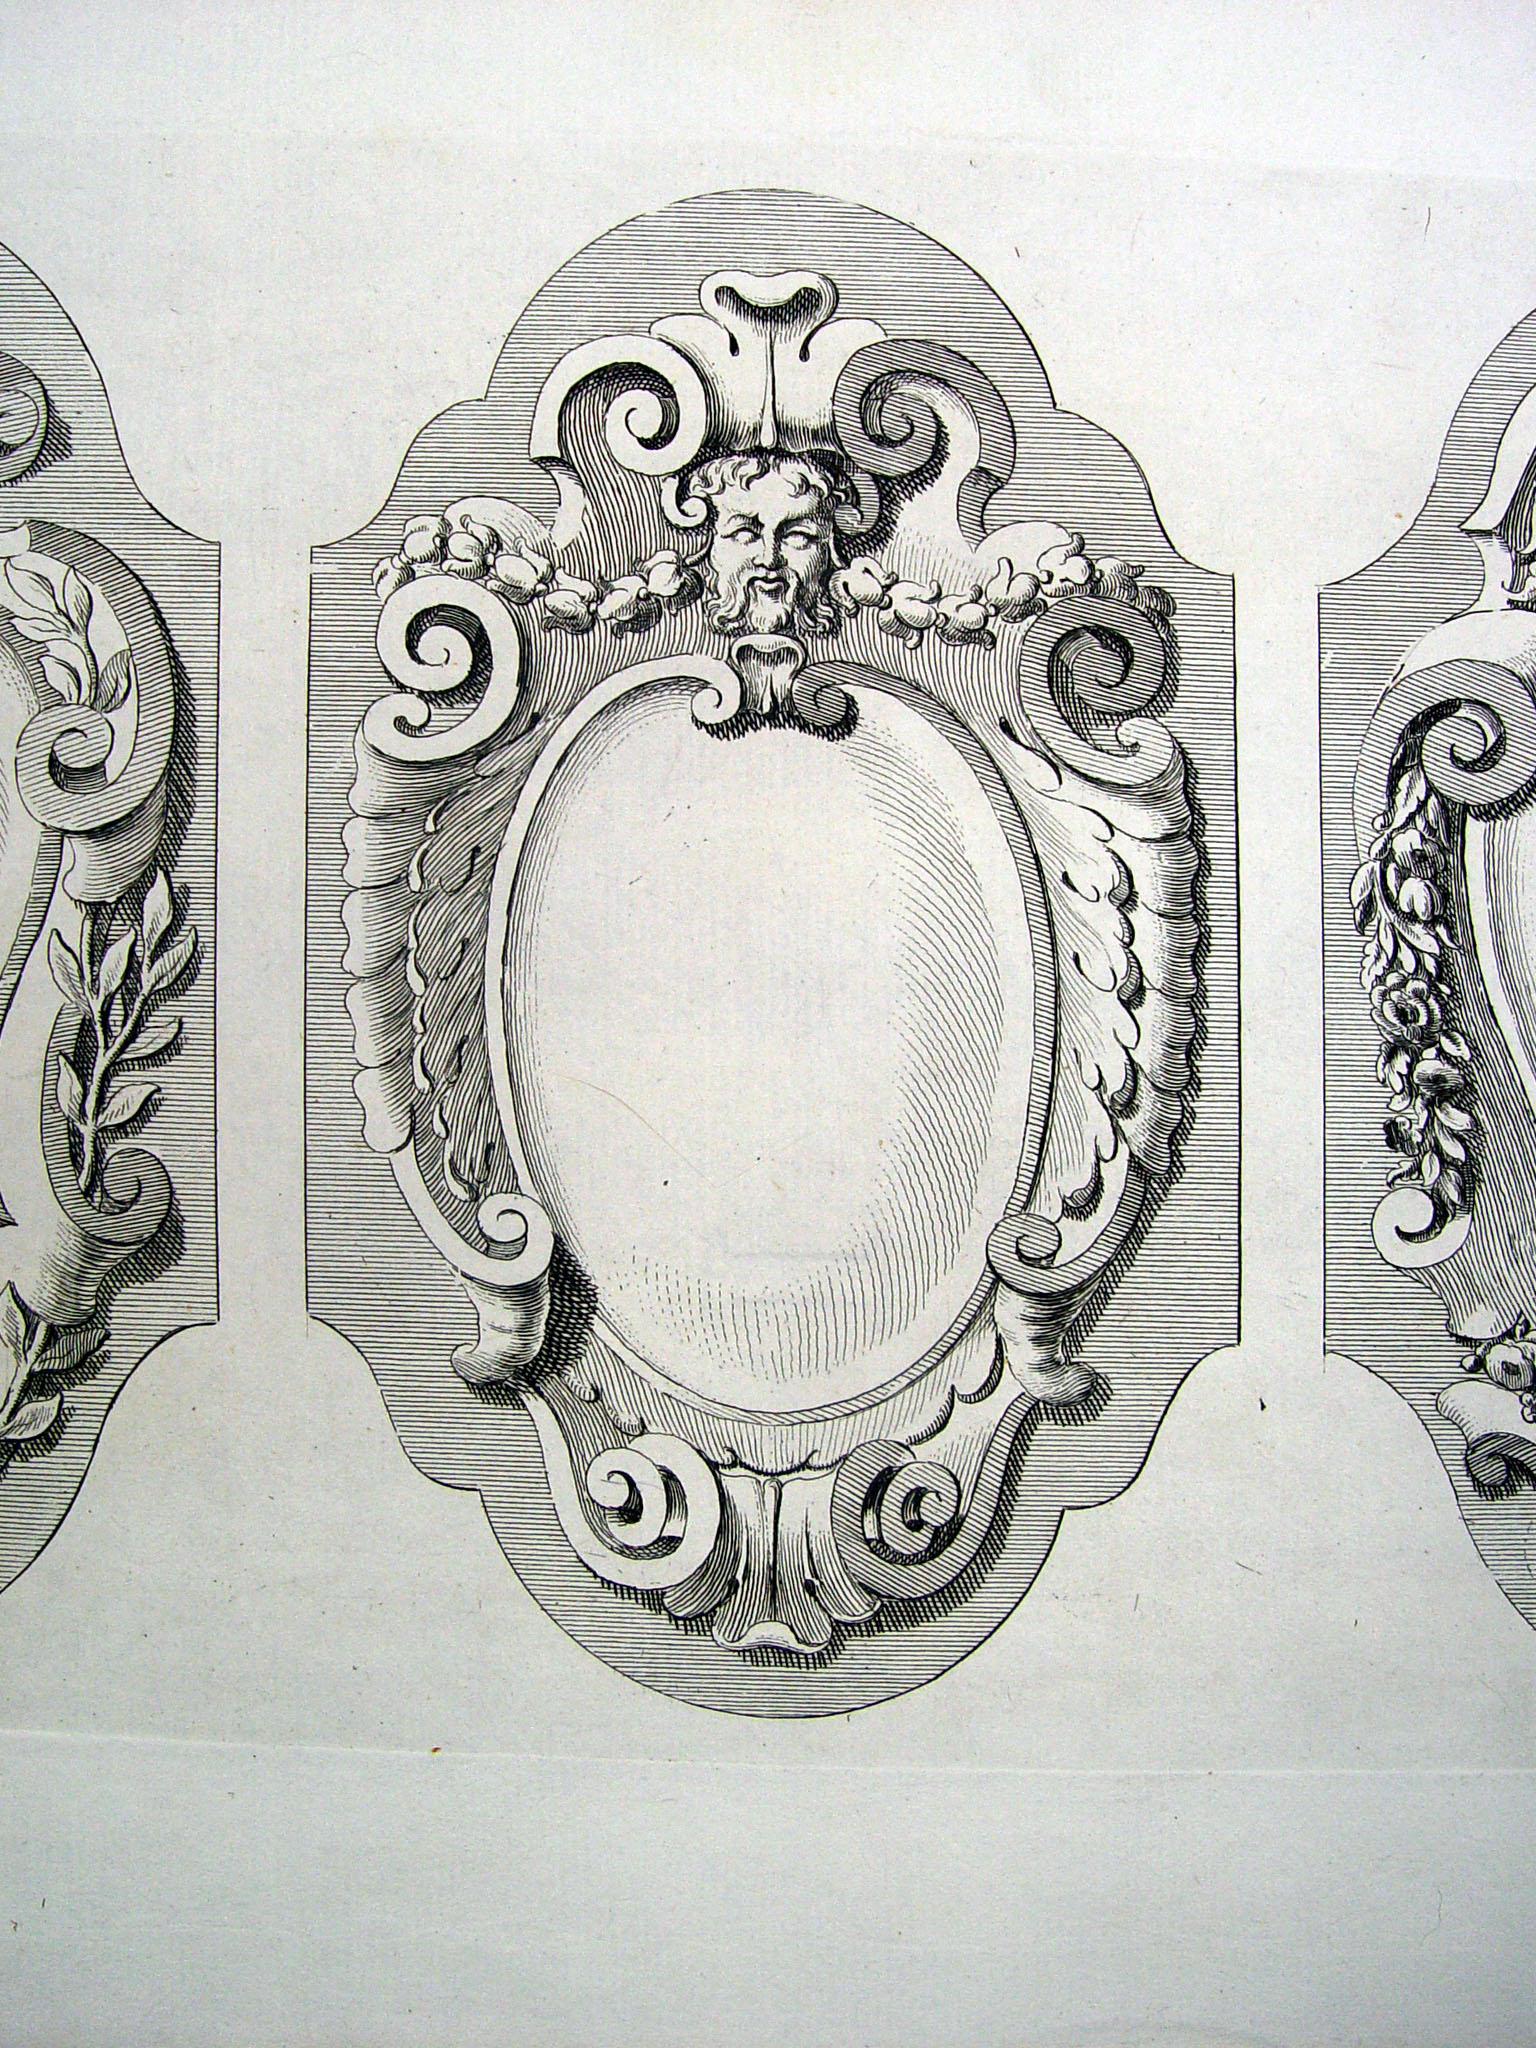 Engraved Antique 1728 Gibbs Architectural Ornament Engraving